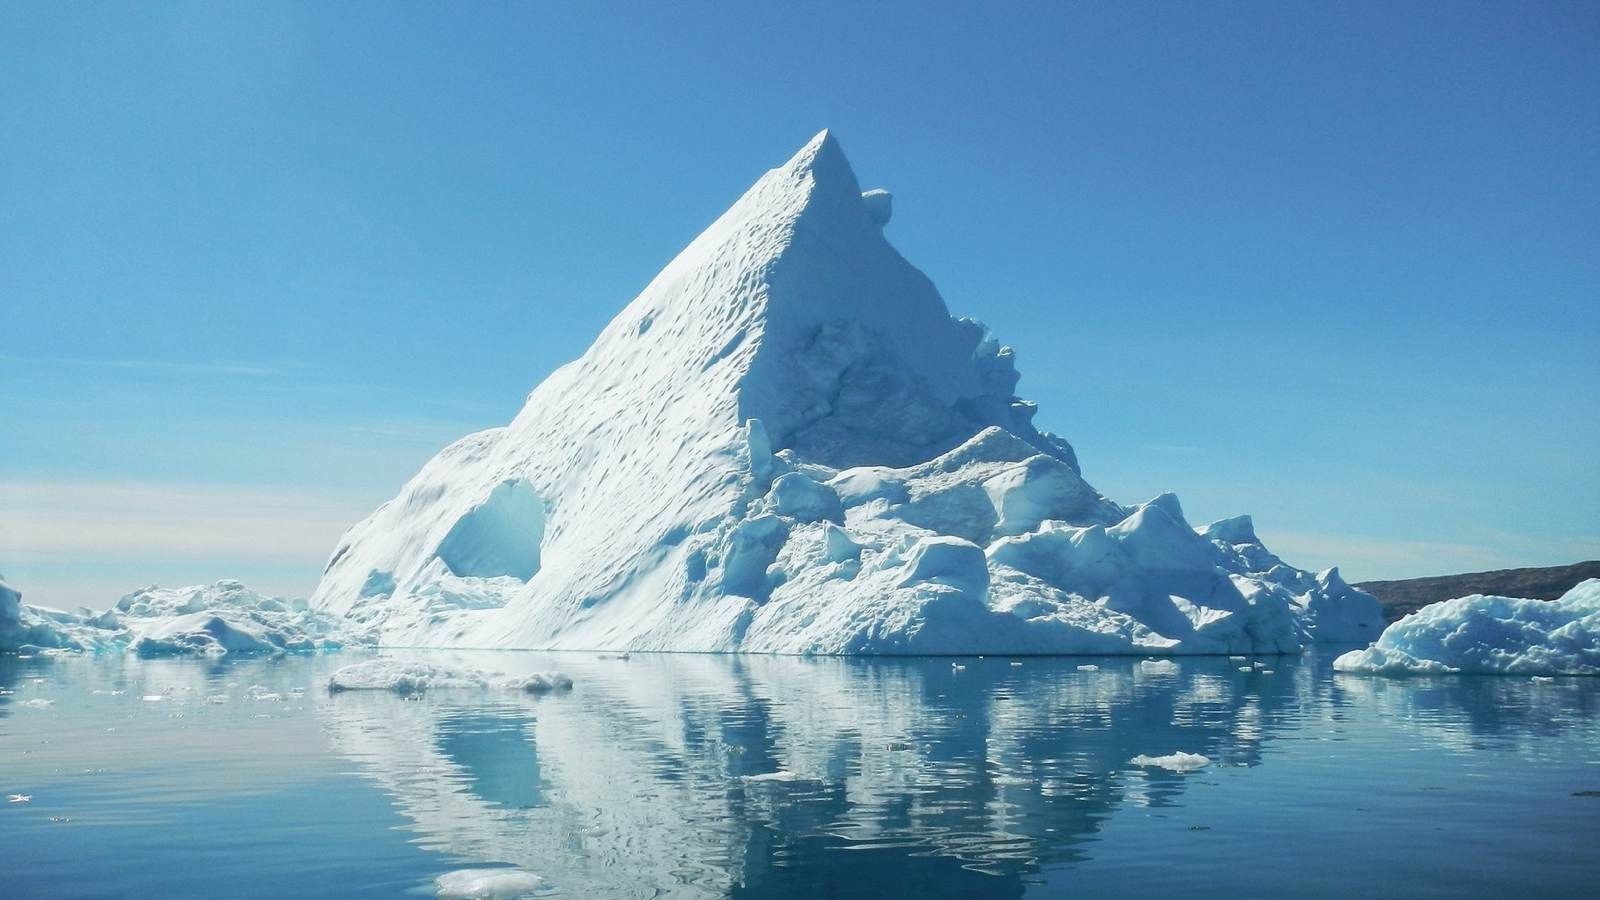 Do not overlook the invisible part of the iceberg!